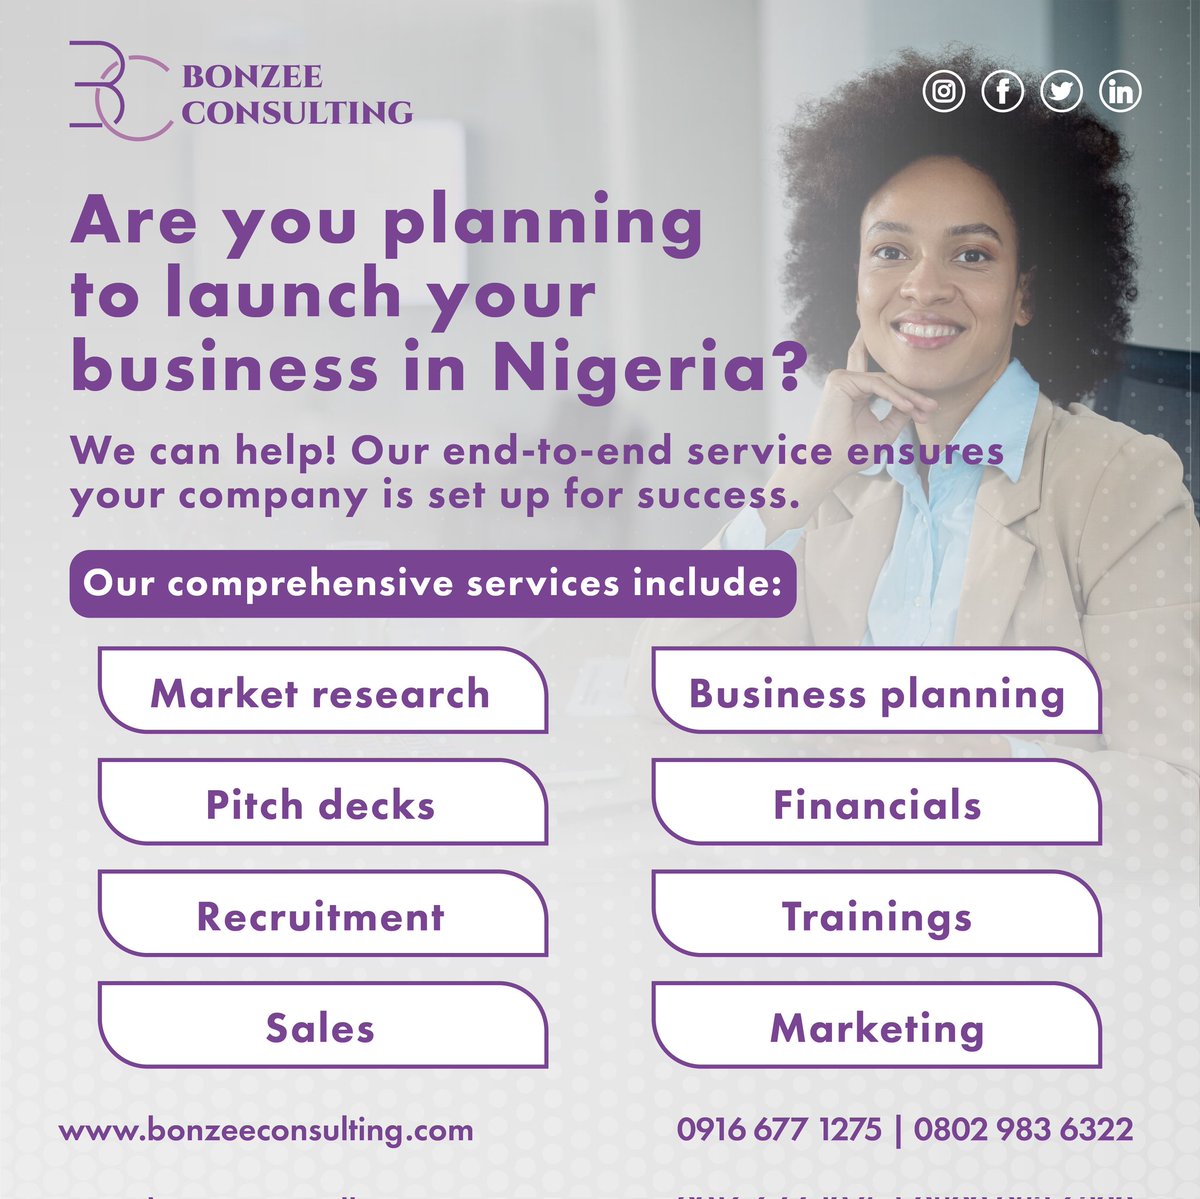 Don't let the logistics of starting a business in Nigeria hold you back. 
Simply send us a DM or email us to get started. 
Let's bring your business to life! 🚀🌟 

#BusinessLaunch #NigeriaBusiness #Entrepreneurship #BonzeeConsulting